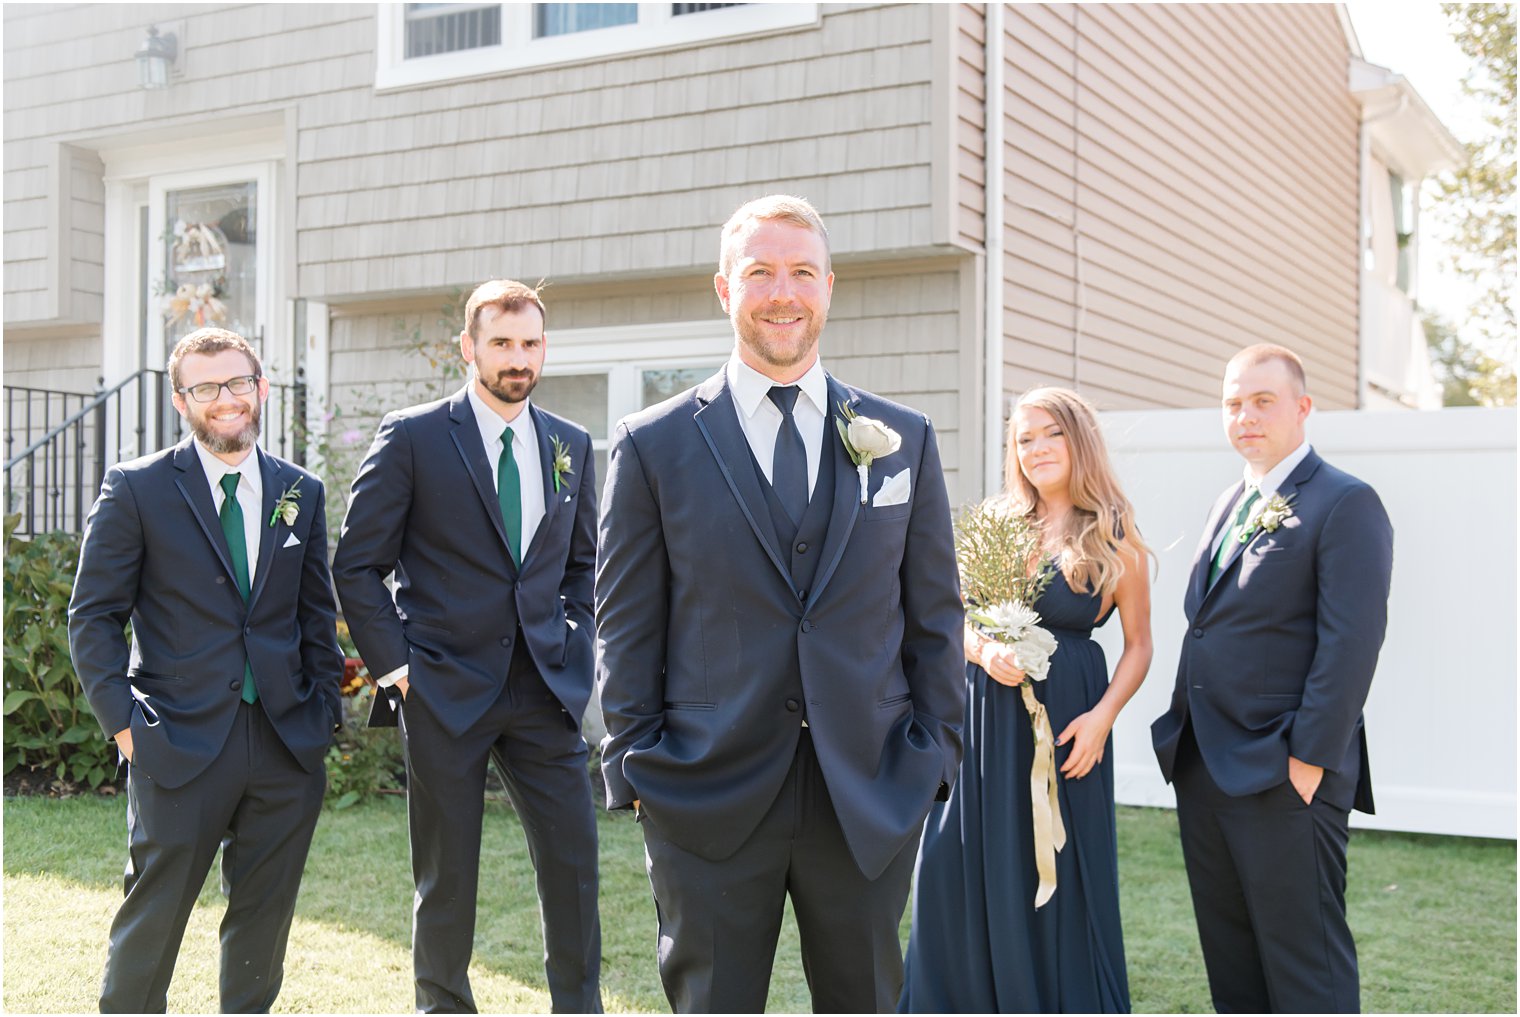 New Jersey groom poses with groomsmen and groomswoman